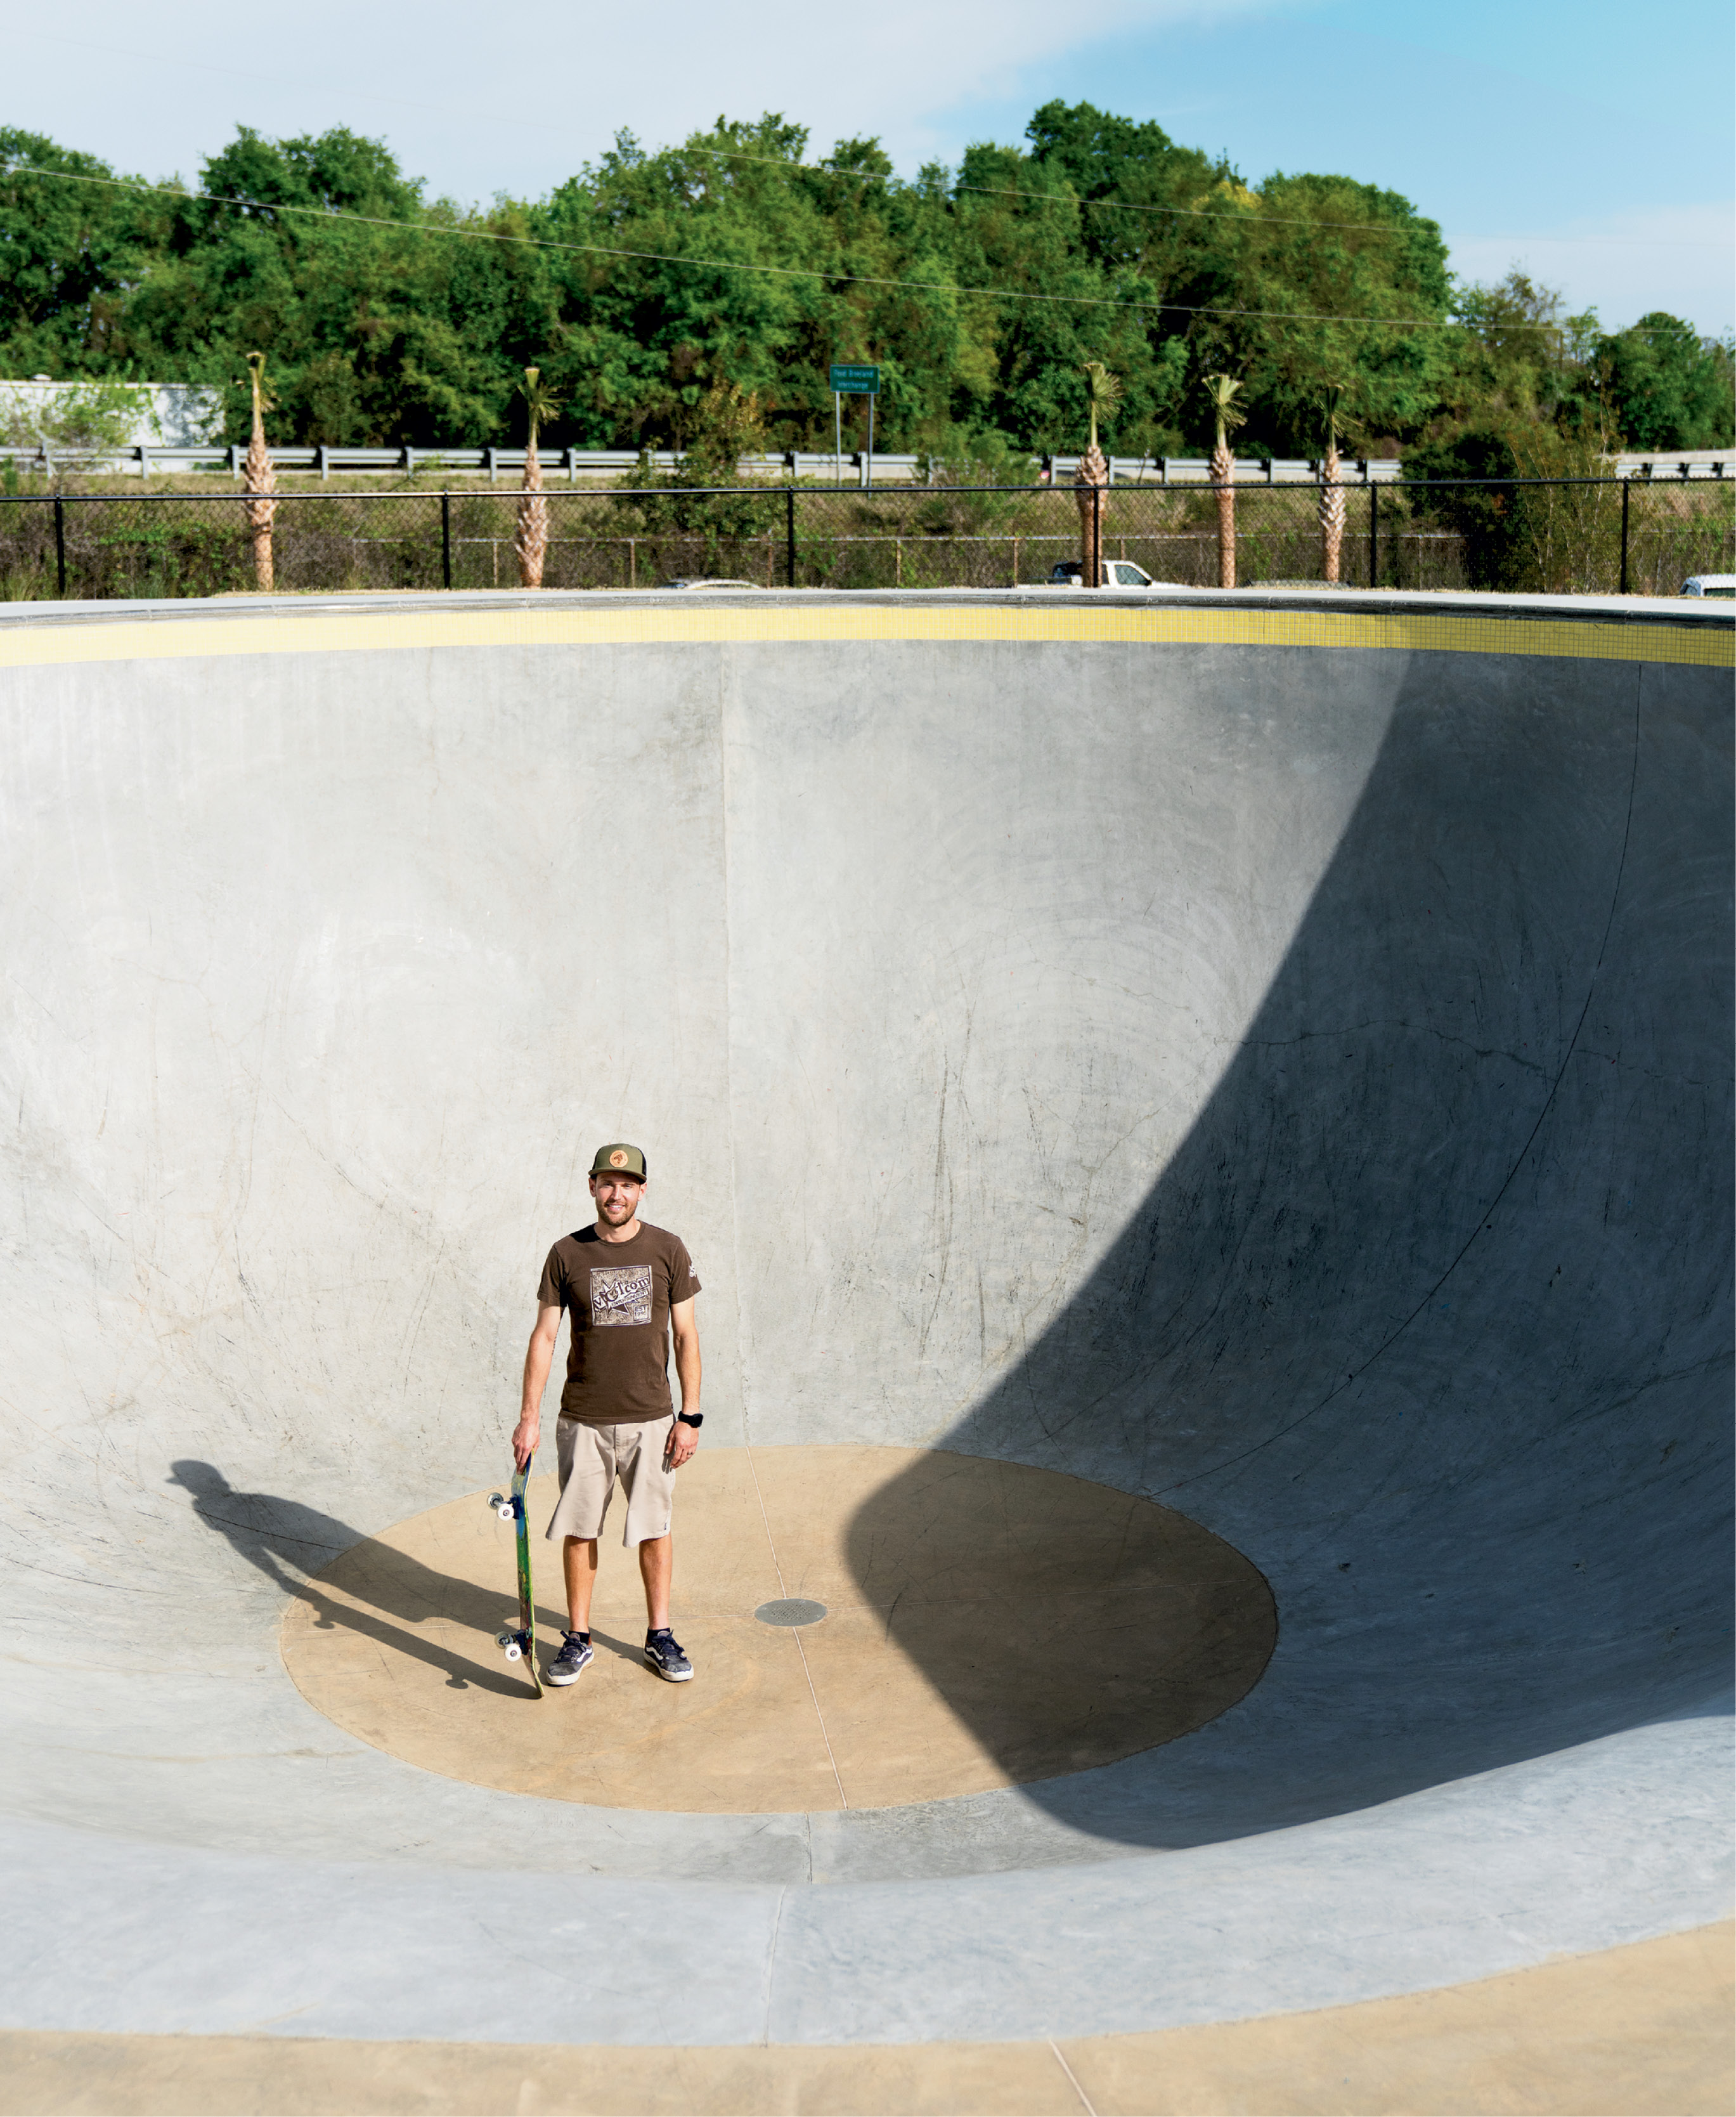 Park manager Josh McFadden in the pro bowl; the avid skater says he found his “dream job” when he was hired to help launch the park last fall. “I love being fully immersed in skateboarding all day, every day,” the College of Charleston grad notes. “This facility is quickly becoming a breeding ground for the next generation of skaters. It serves as a safe place where young people can come and practice their skills and interact with their peers.”